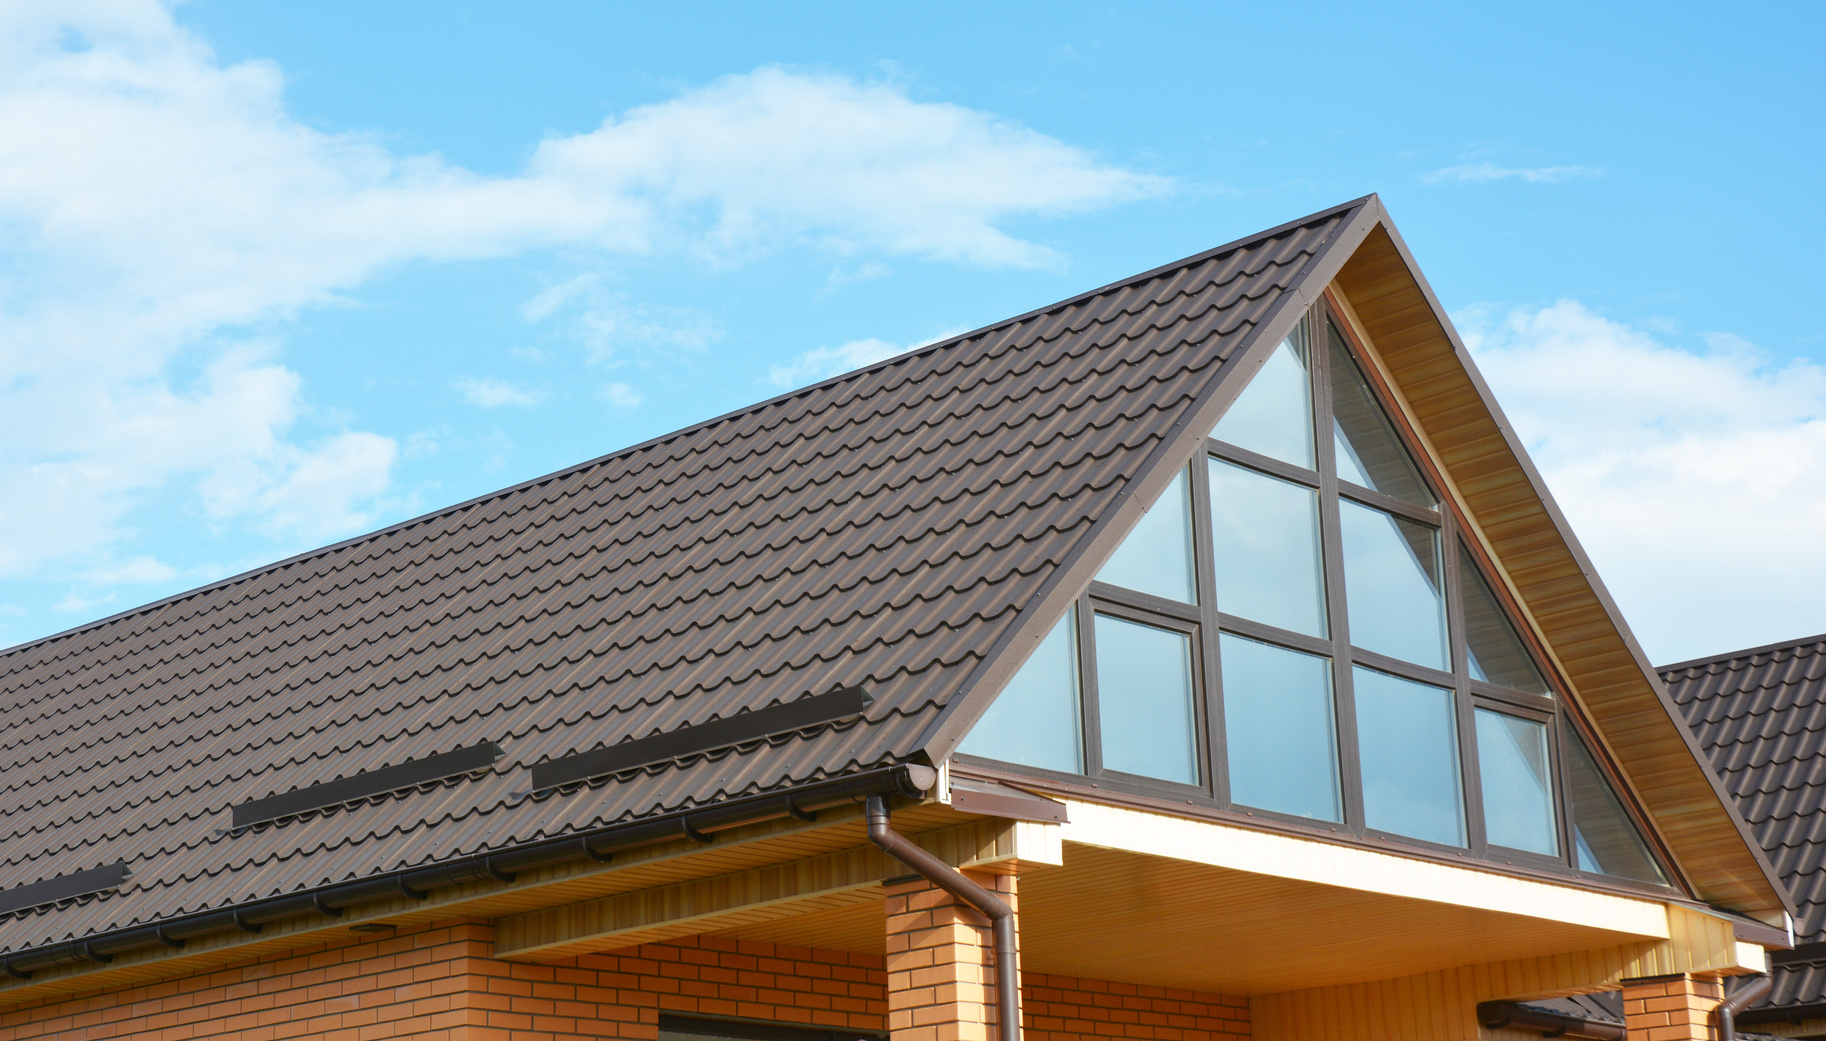 Order Our Safe and Effective Metal Roof Flashing Online Today!